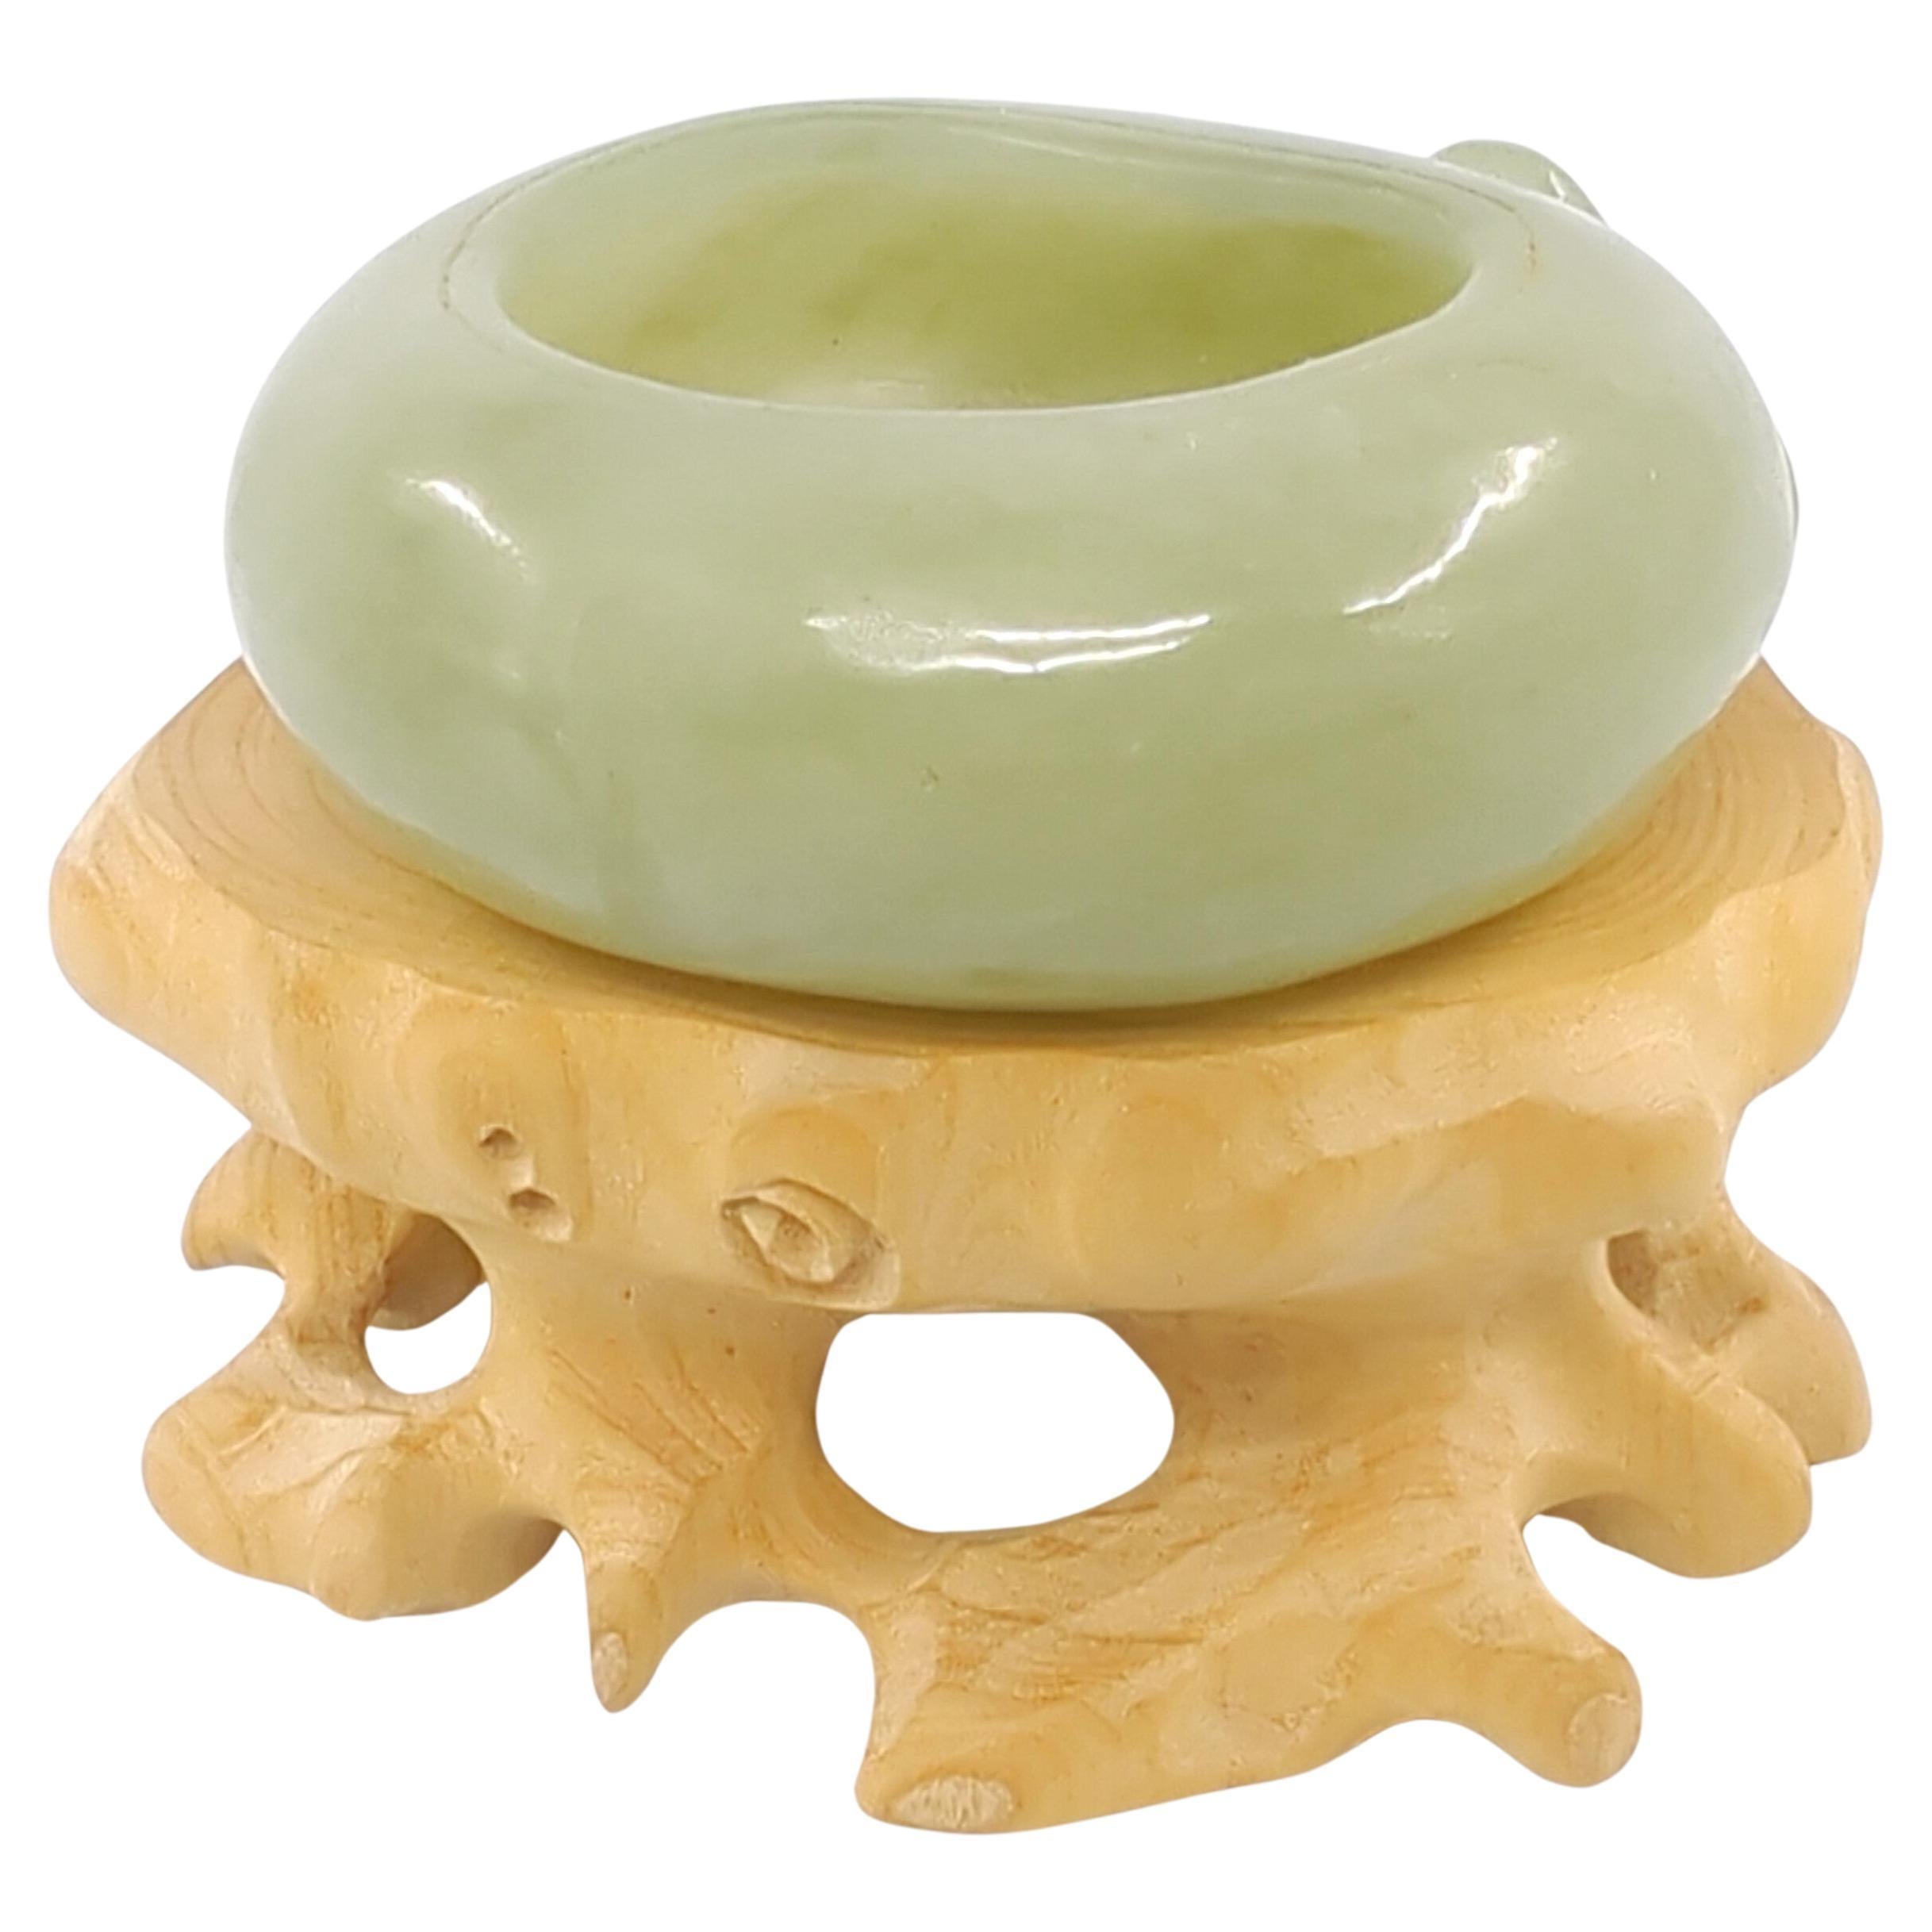 This exceptional celadon jade brush wash epitomizes the pinnacle of Chinese craftsmanship. Carved in the form of a hollowed peach, the piece showcases intricate detailing and a high level of artistry. The jade itself is of a delicate celadon hue,